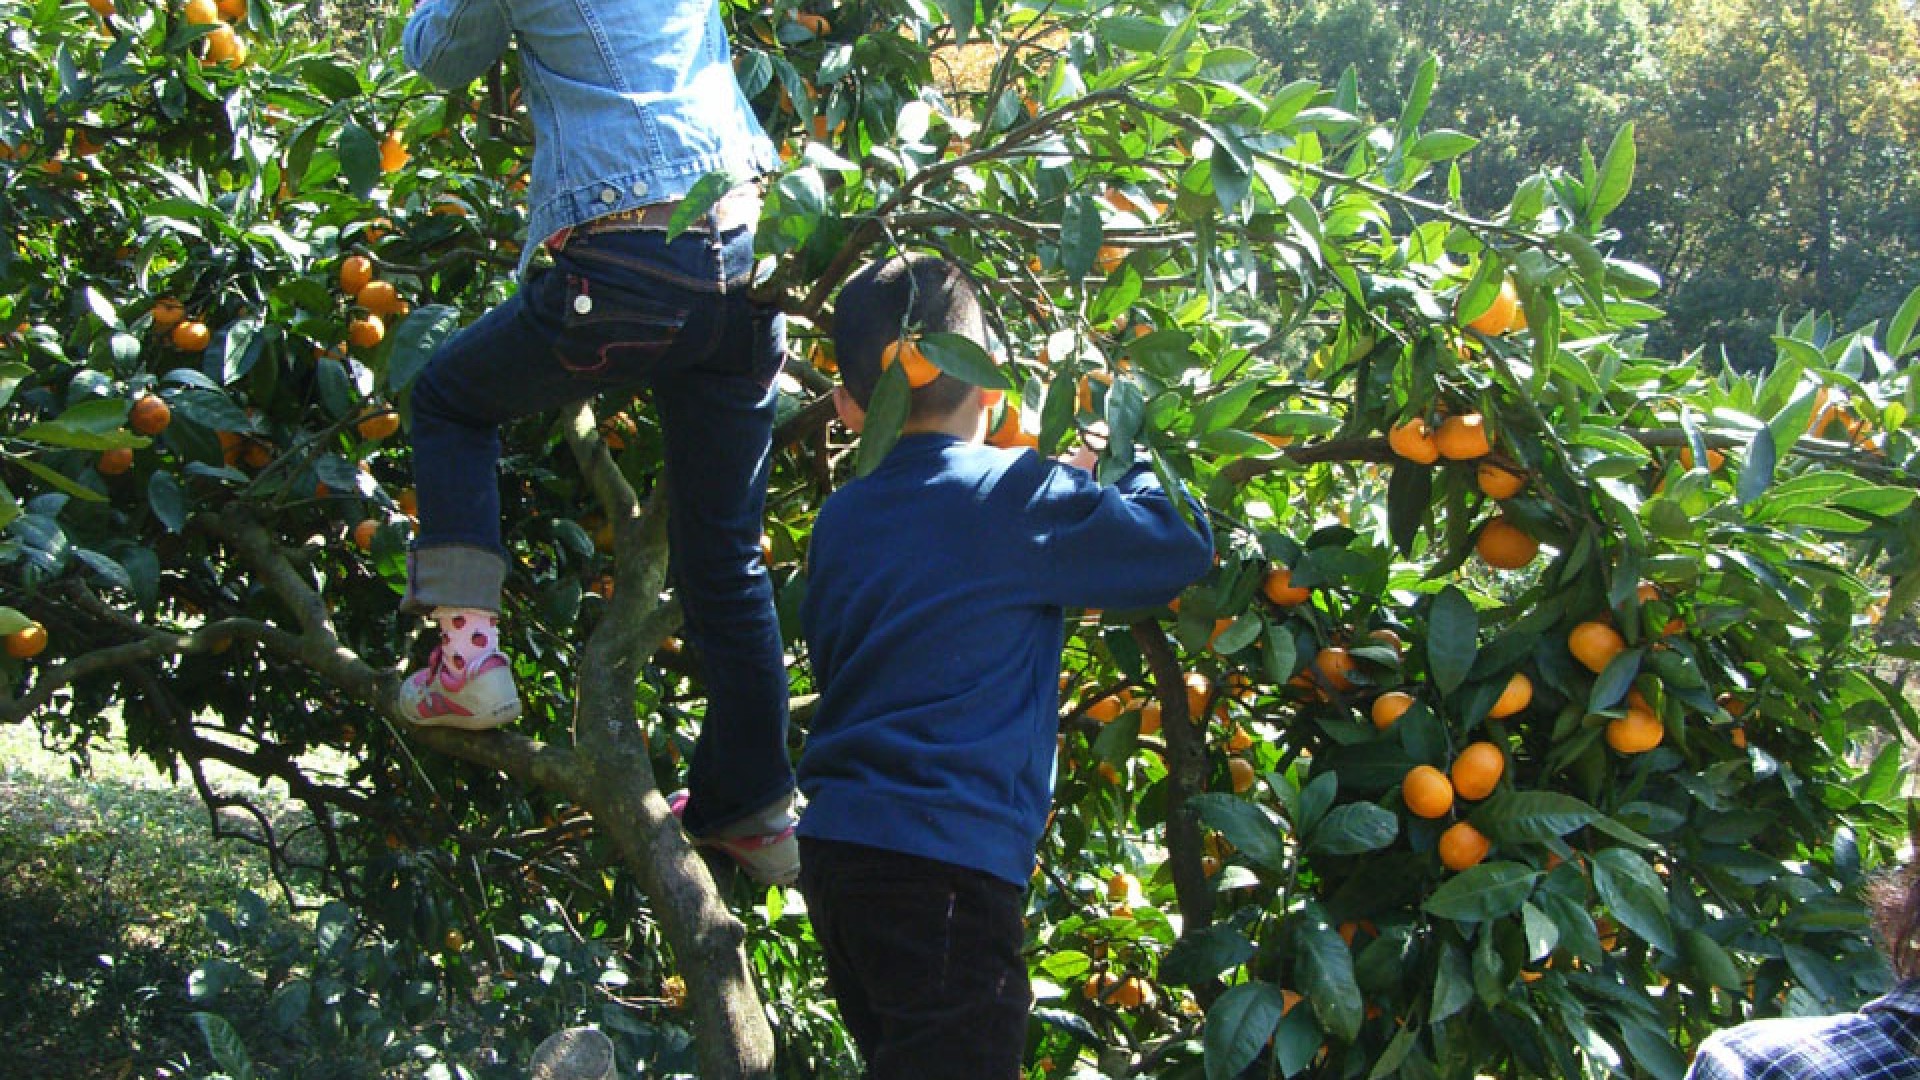 Oiso Fruit Orchard / Mikan picking